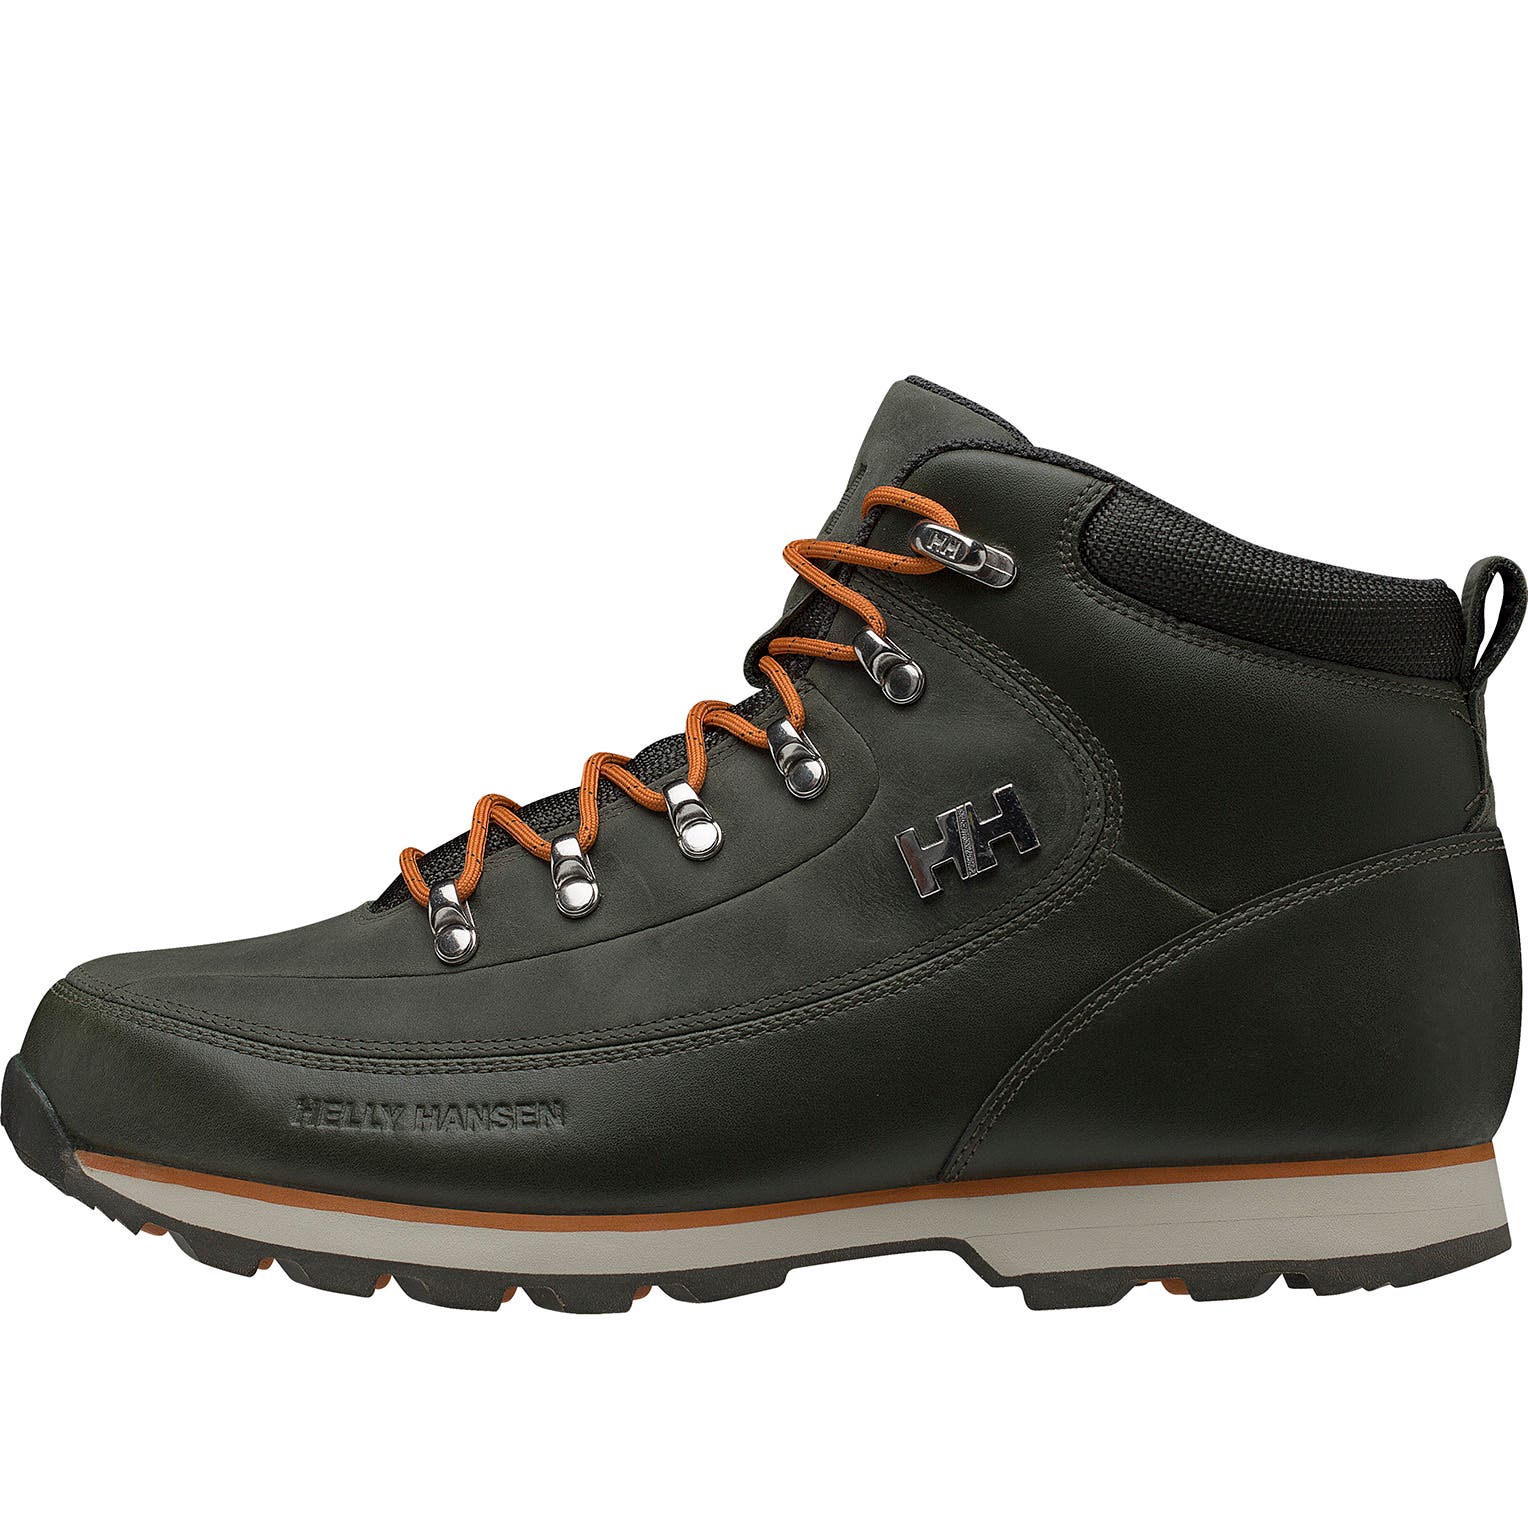 Helly Hansen Men's The Forester Winter Boot in Forest Night-Marmelade from the side